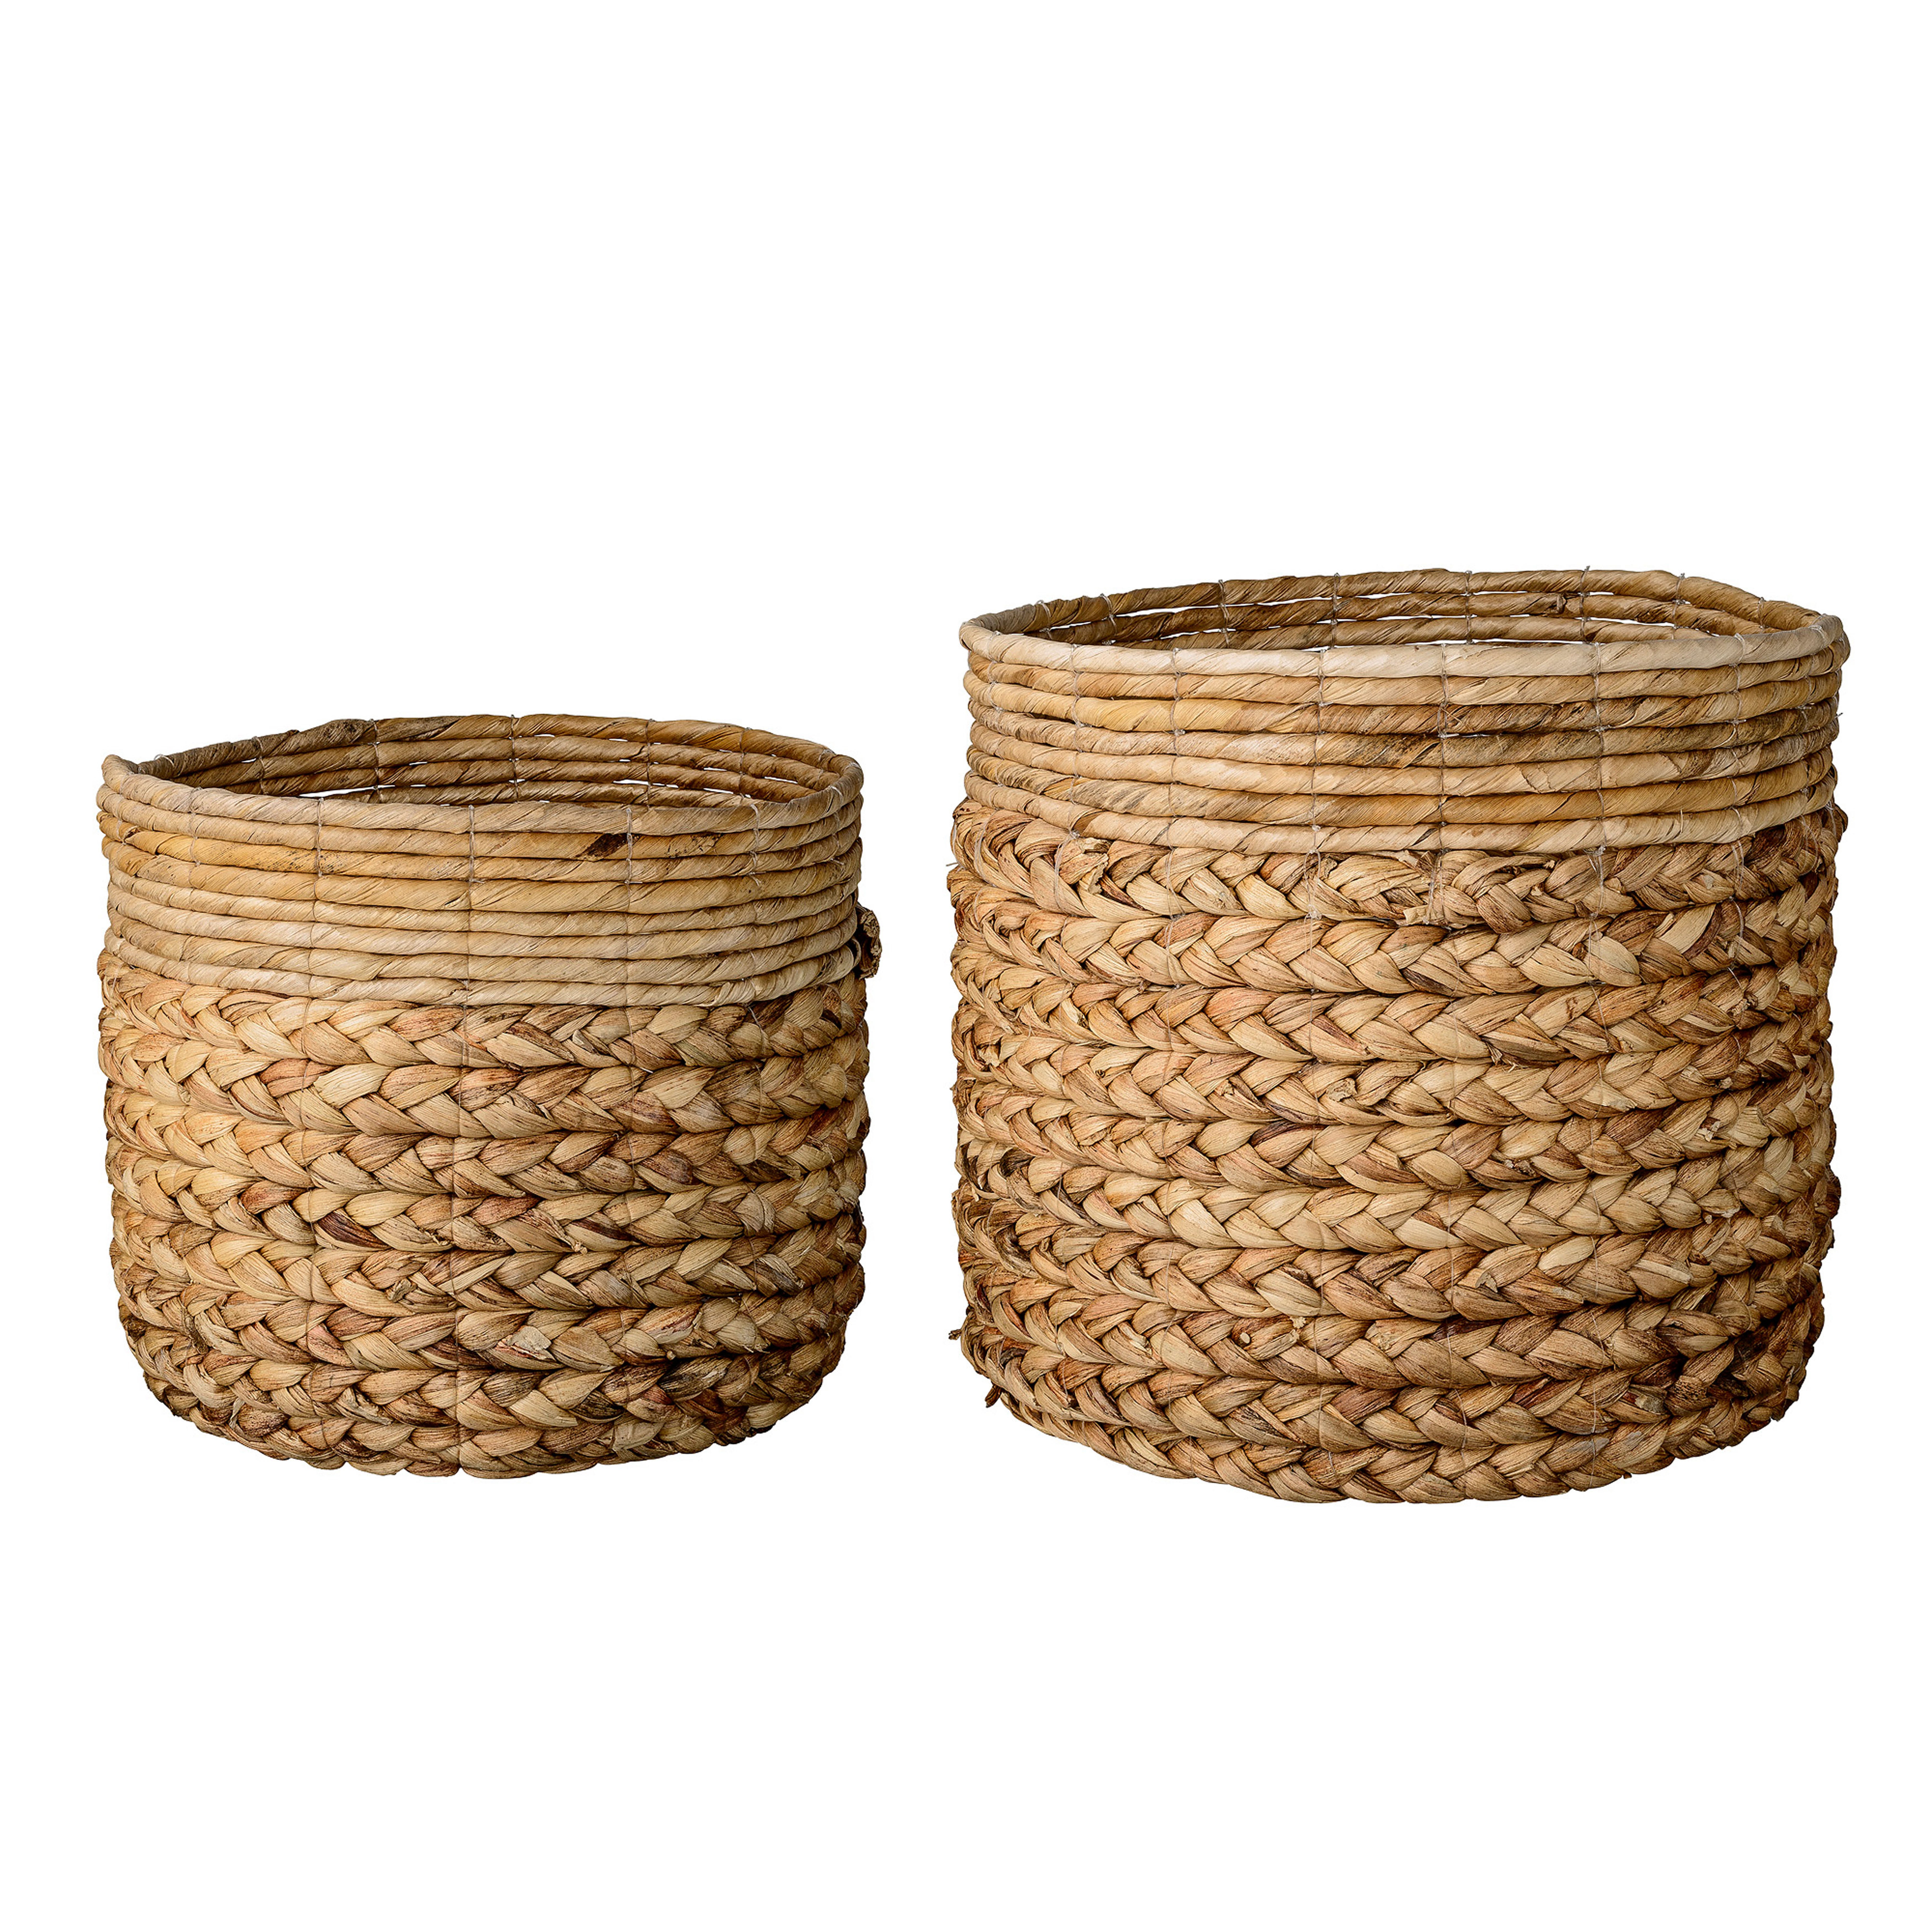 Beige Water Hyacinth and Banana Leaf Baskets (Set of 2 Sizes) - Moss & Wilder